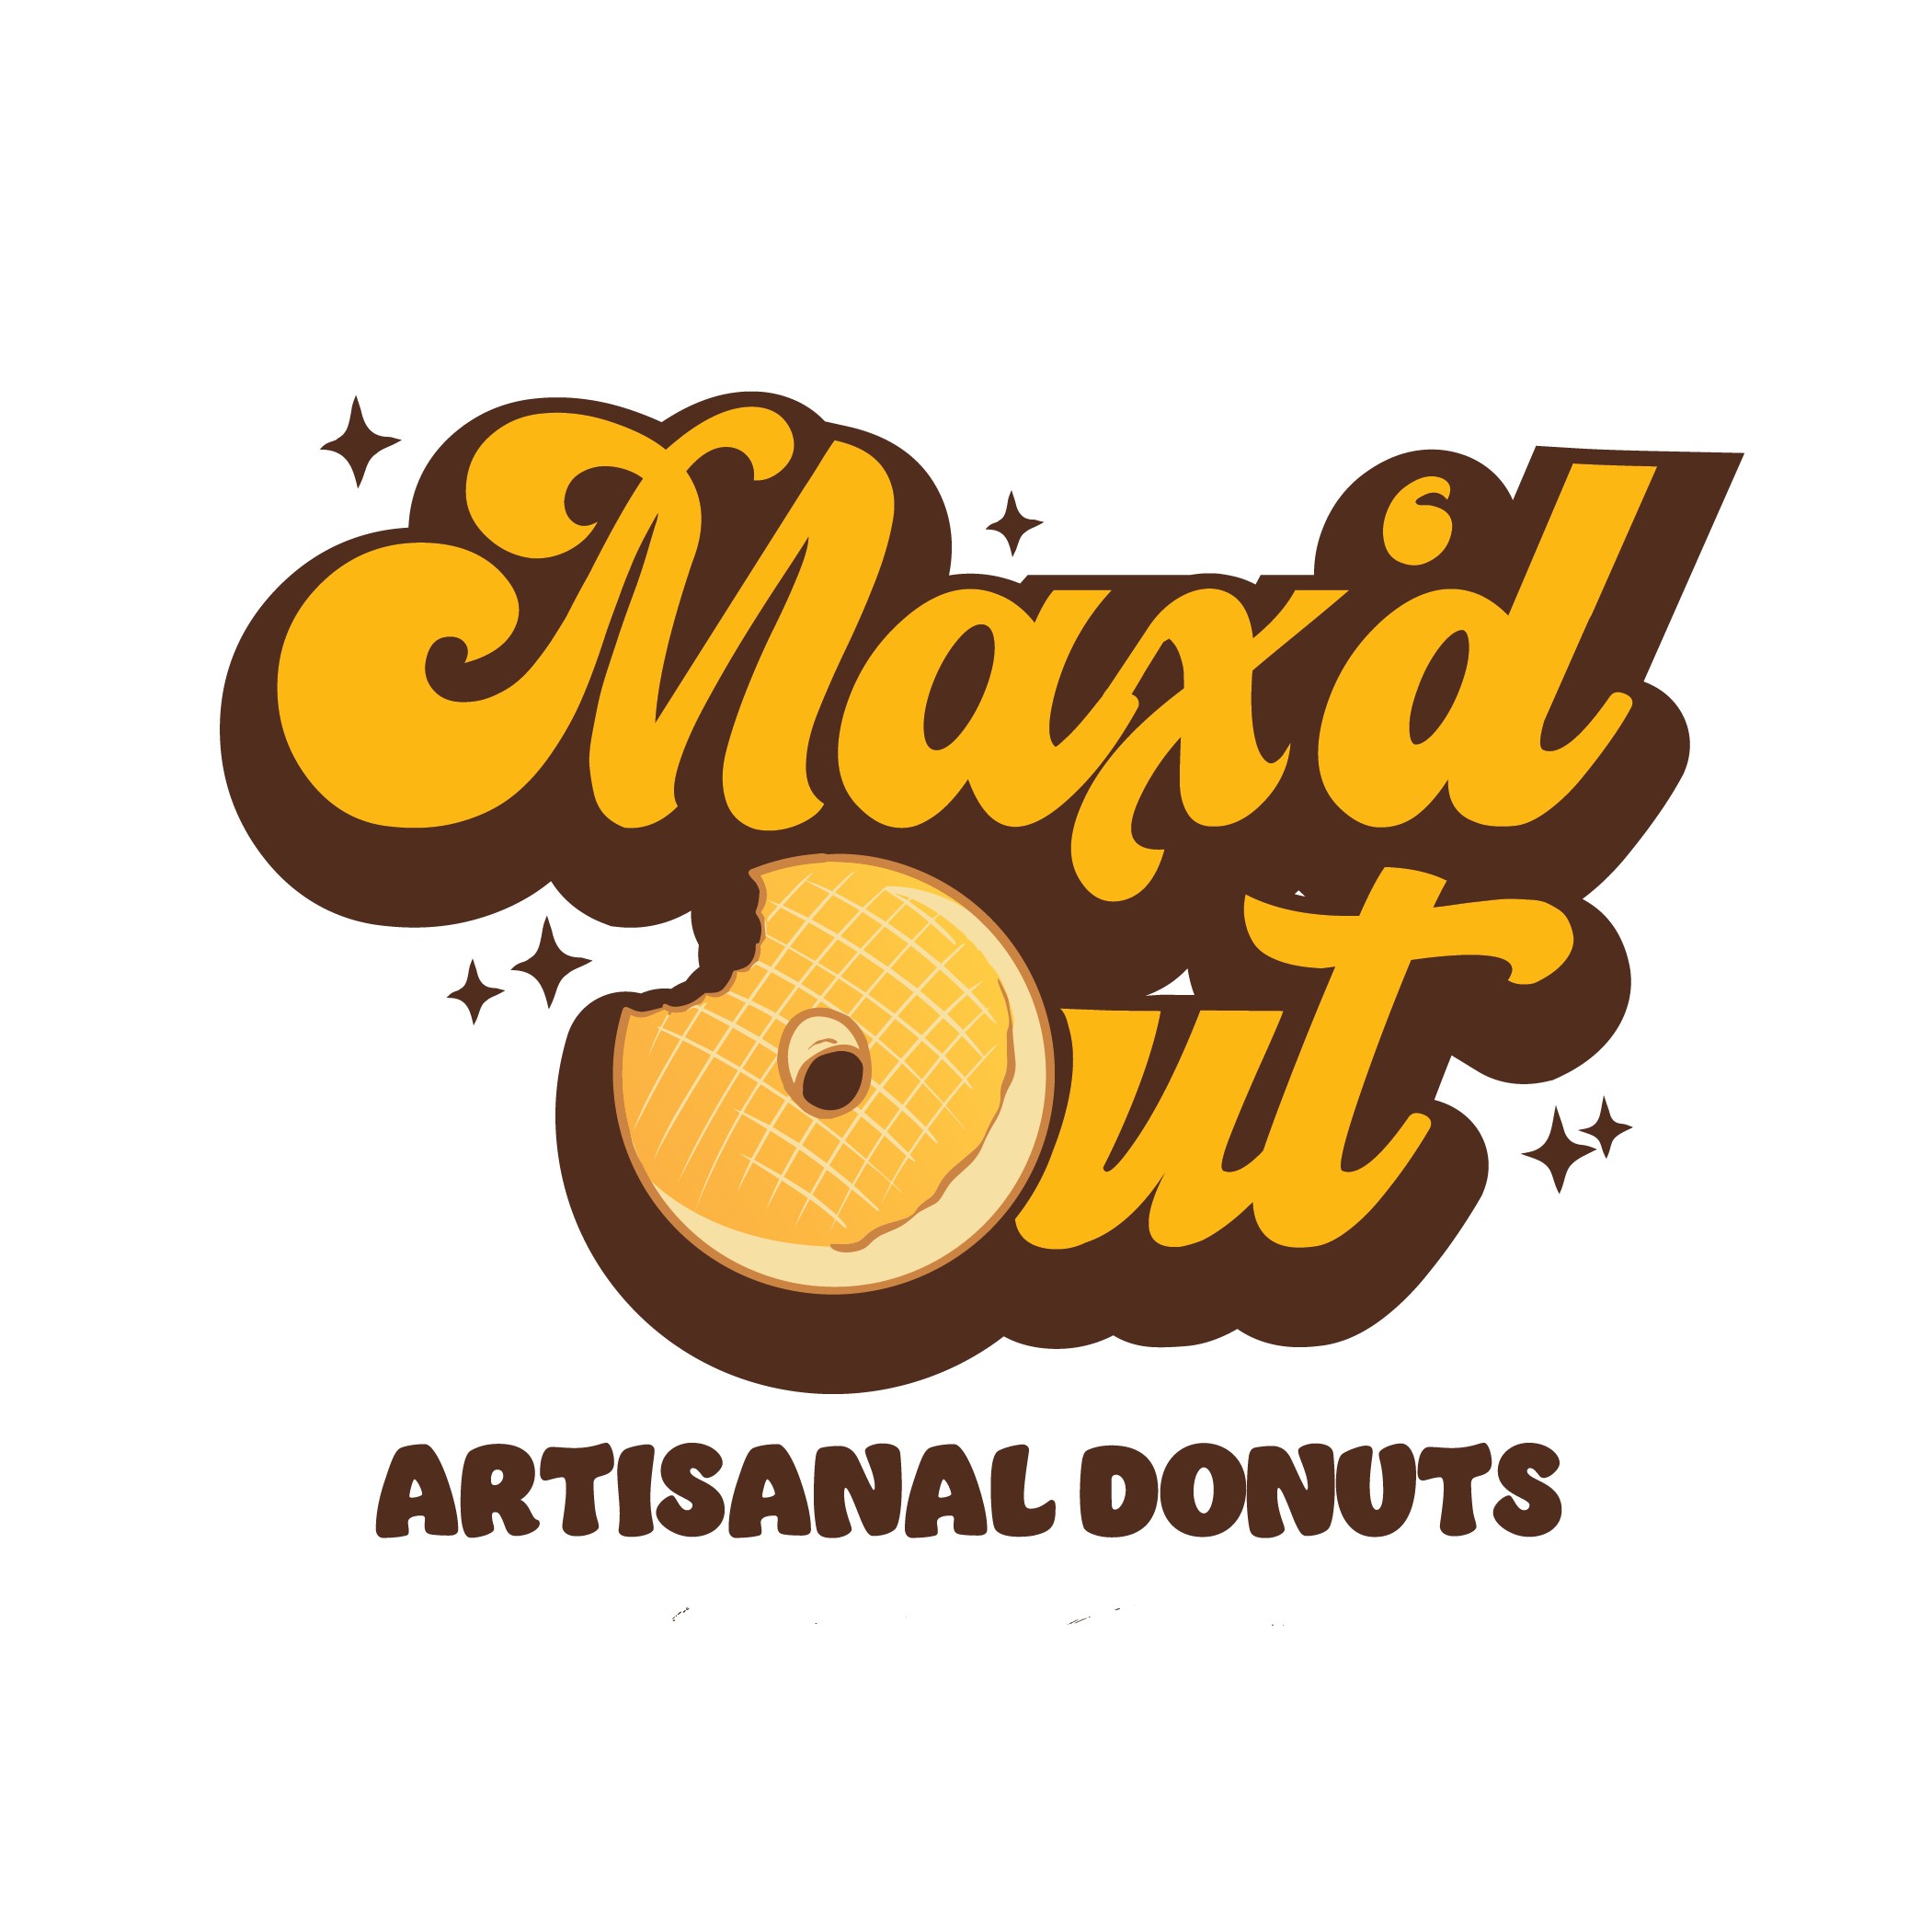 Max’d Out Donuts logo